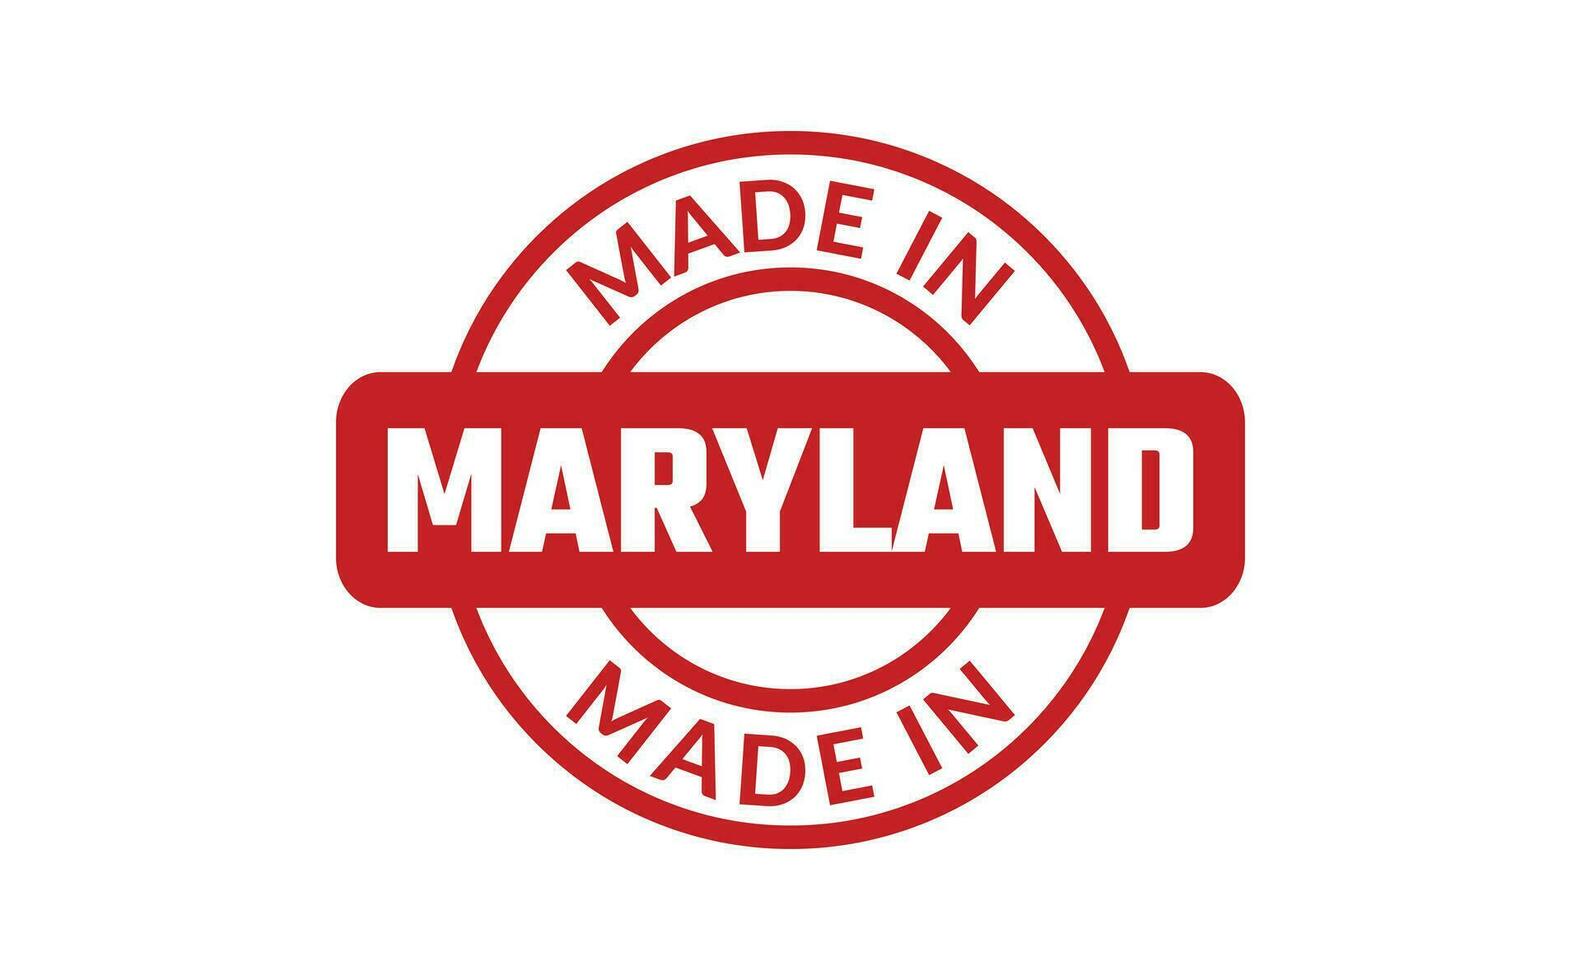 Made In Maryland Rubber Stamp vector